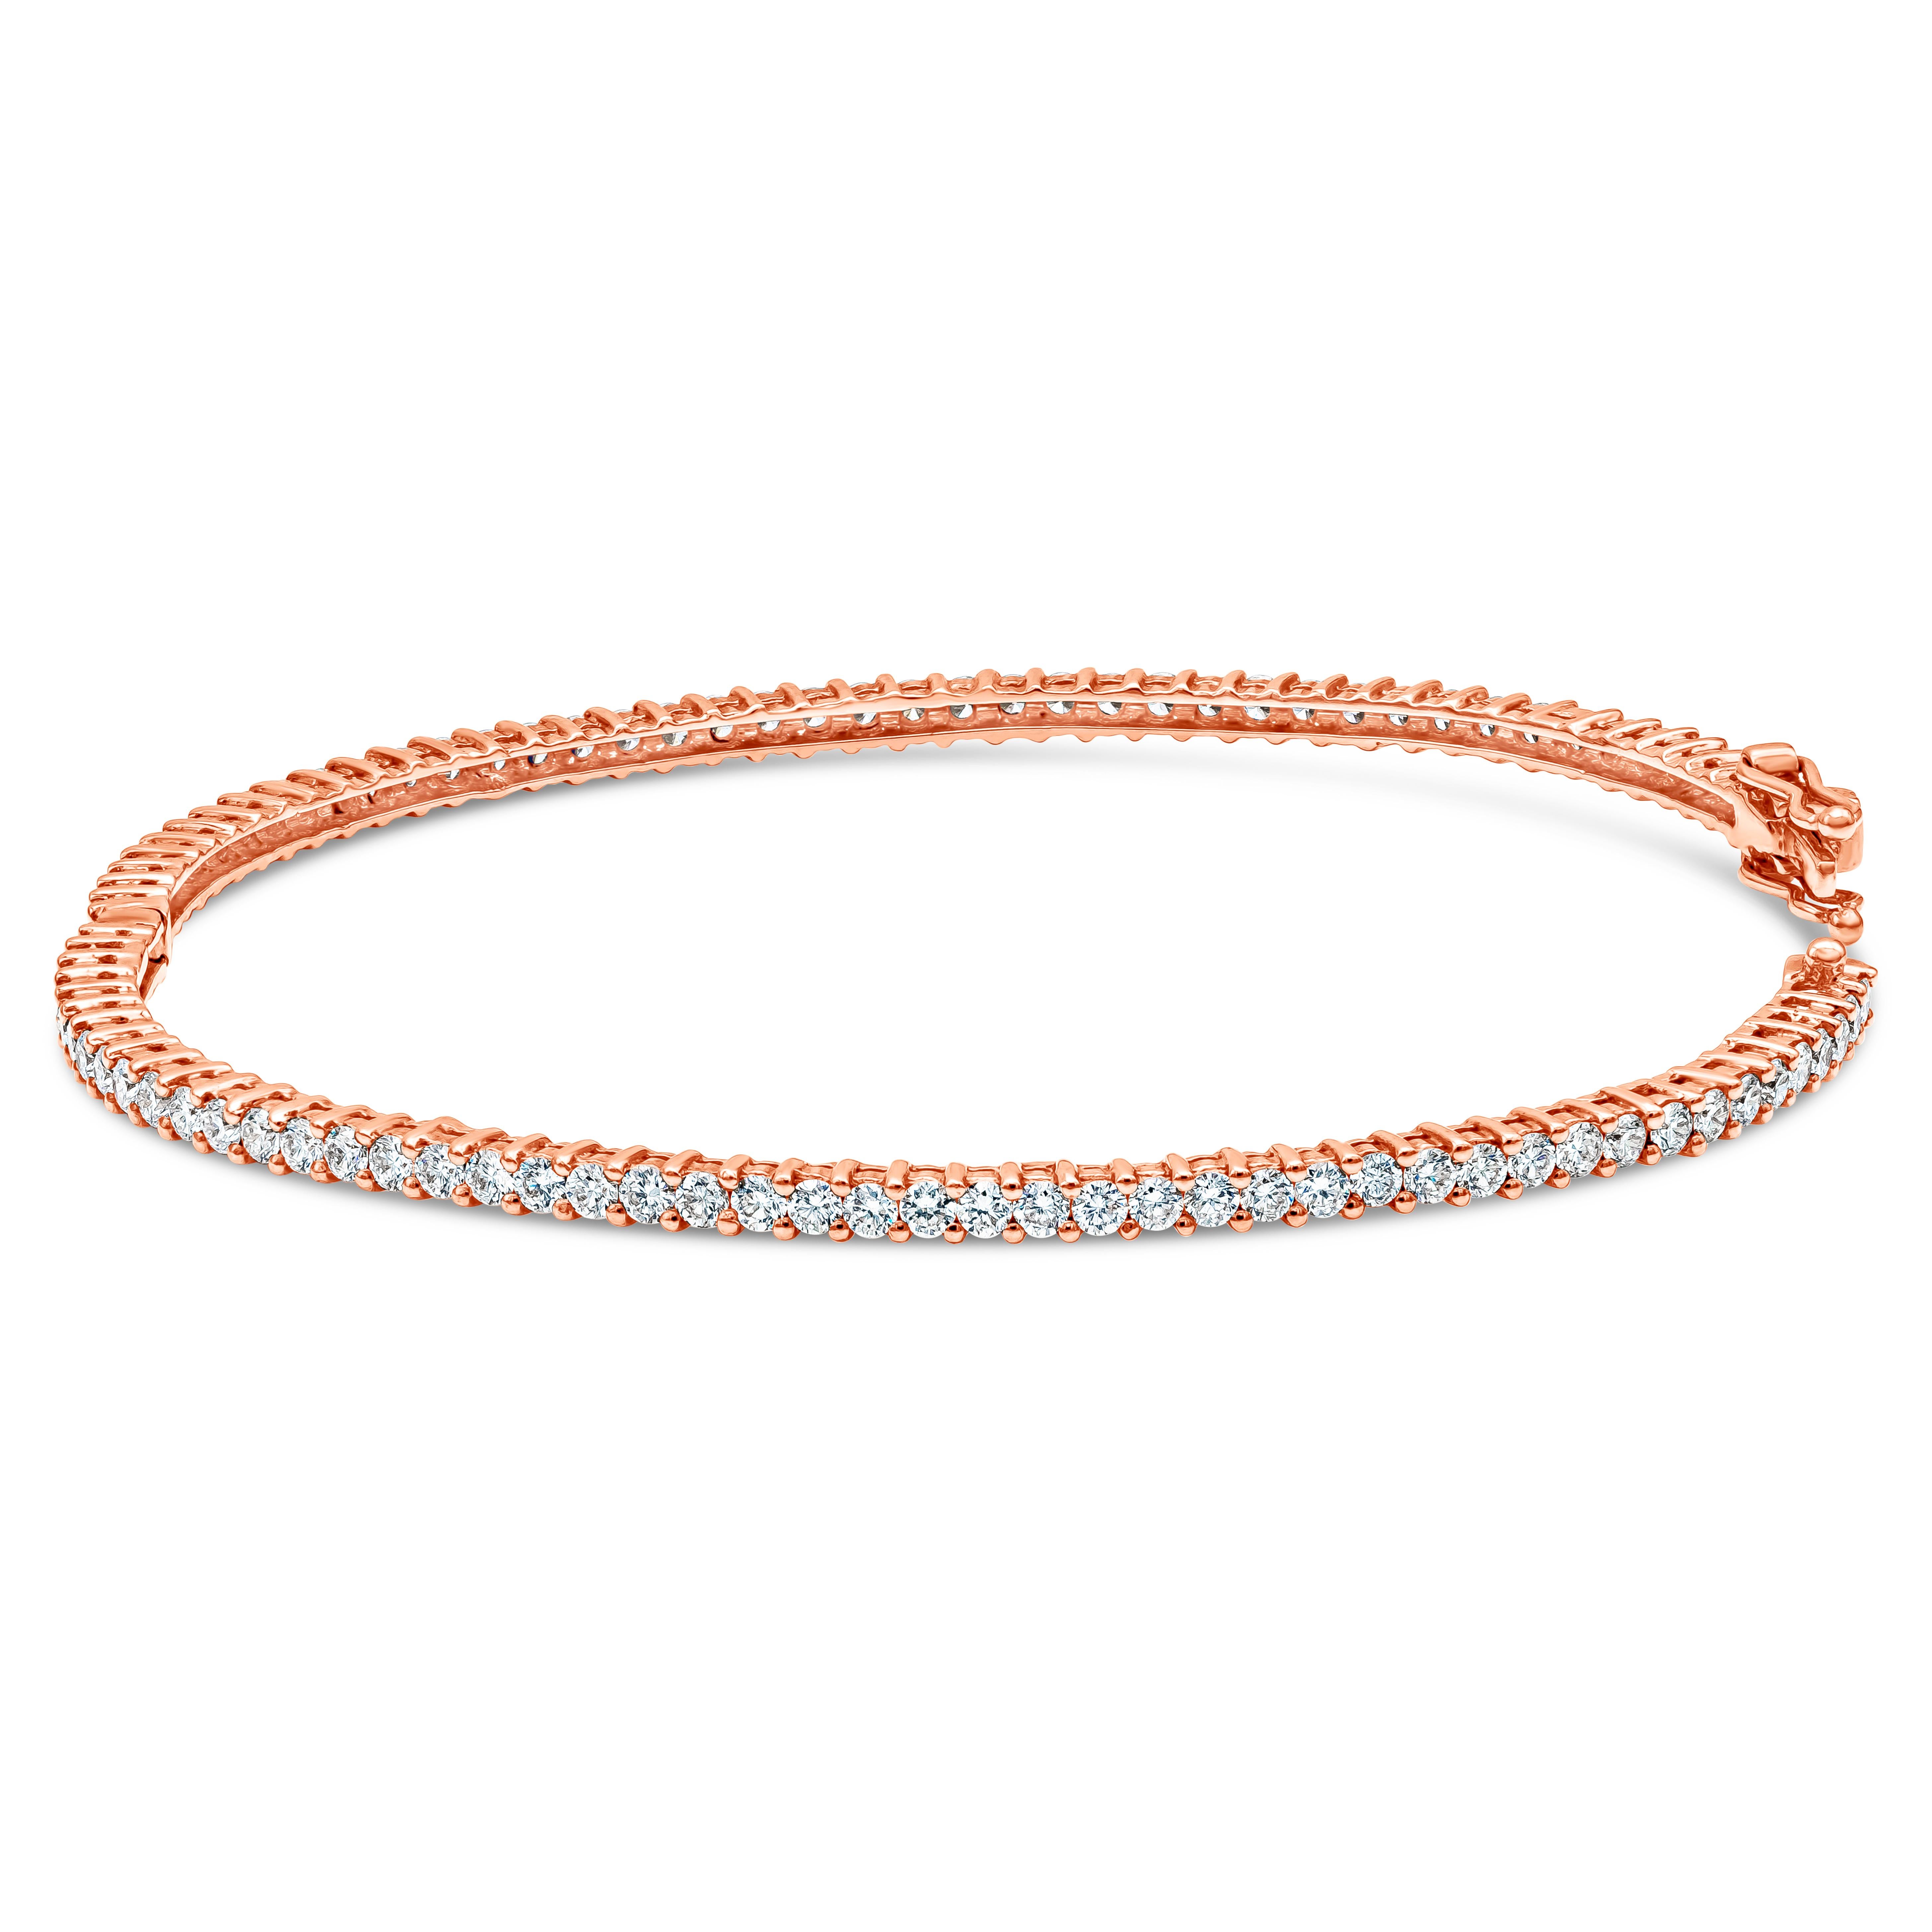 A classic bangle bracelet eternity encrusted with round brilliant diamonds weighing 2.79 carats total. Made with 18K Rose Gold.

Roman Malakov is a custom house, specializing in creating anything you can imagine. If you would like to receive a